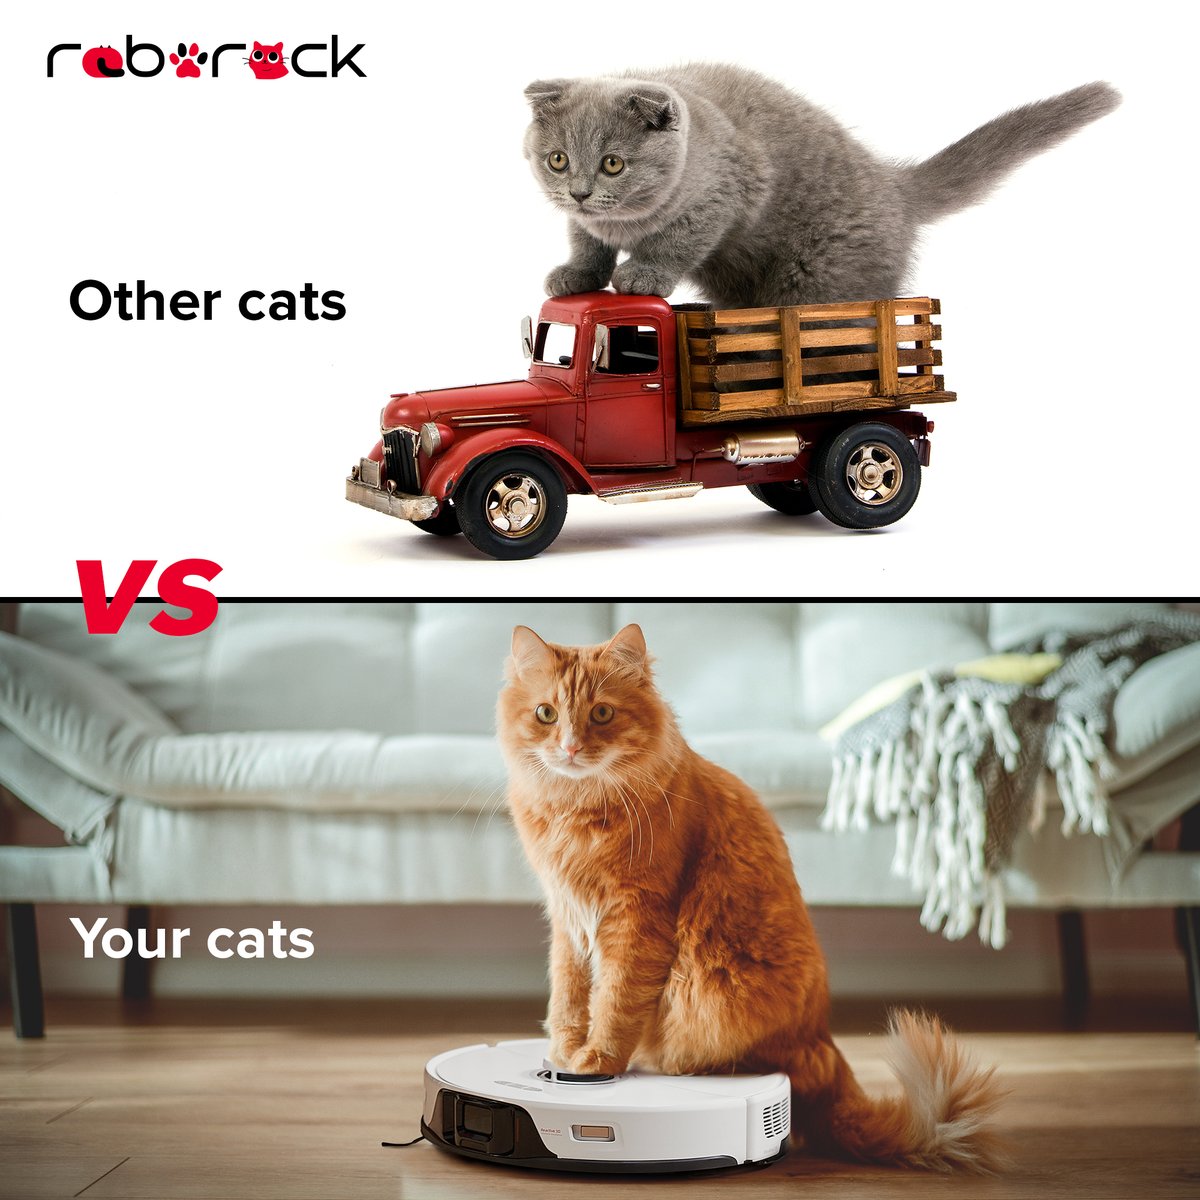 If you can’t afford a car for your cats, why not a Roborock. Come to meet Roborock at CatCon in California, Event Details: 🌆Location: Pasadena Convention Center in Pasadena, CA 🙋🏼‍♀️Booth Number: 325 🐱Meet and Greet Time: 1 pm on Saturday and Sunday #PurrfectlyClean #roborock